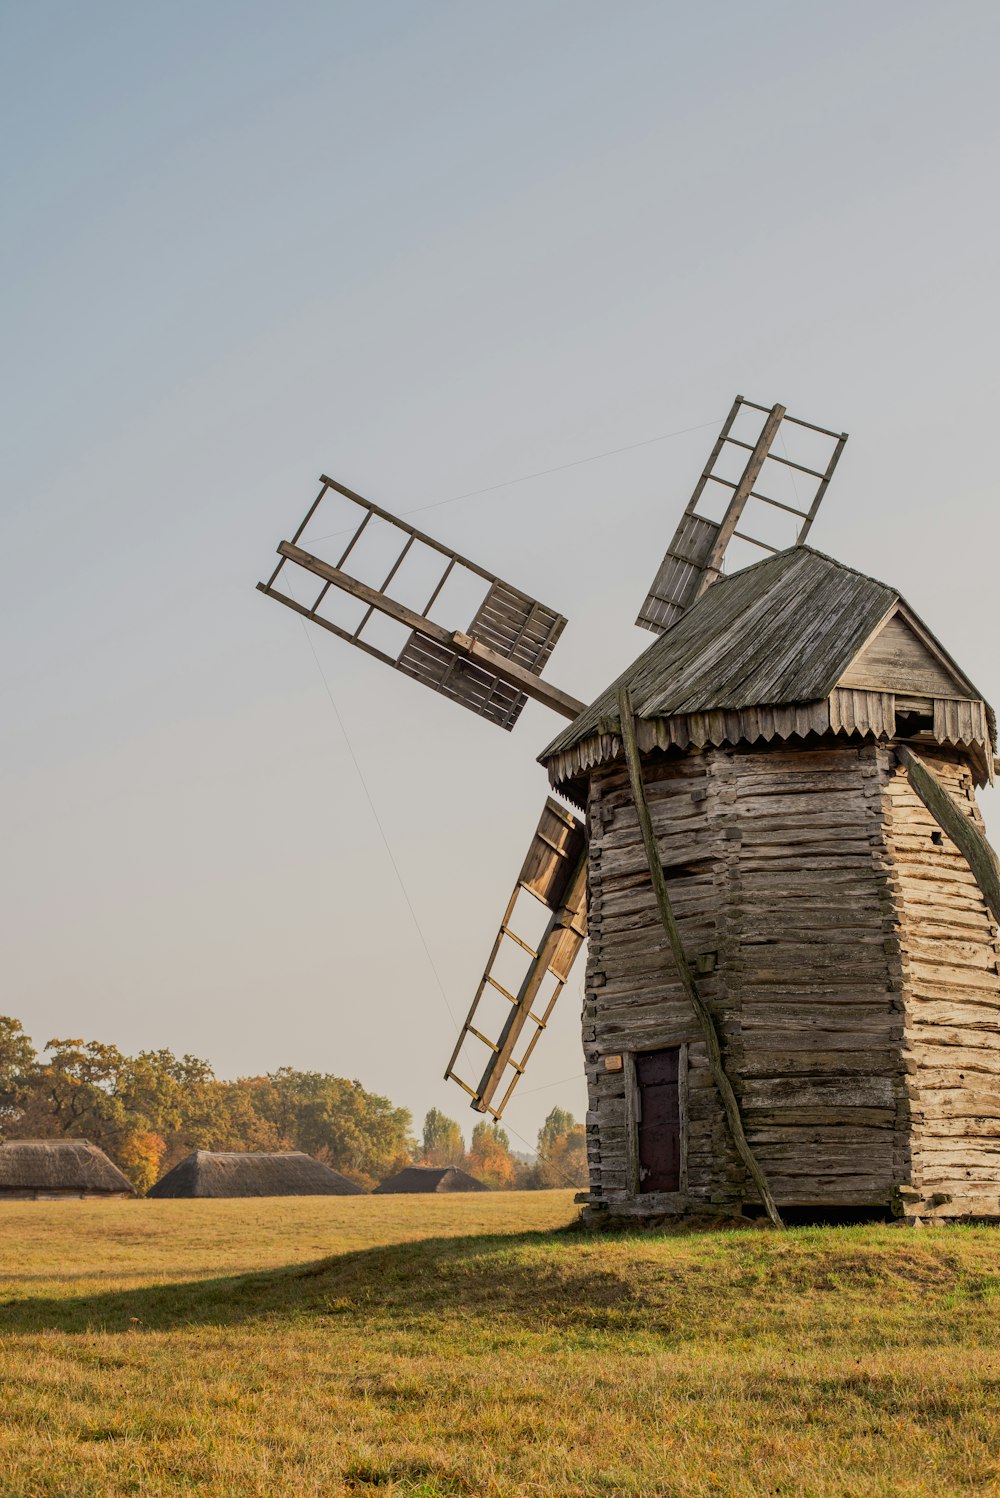 an old wooden windmill in a grassy field